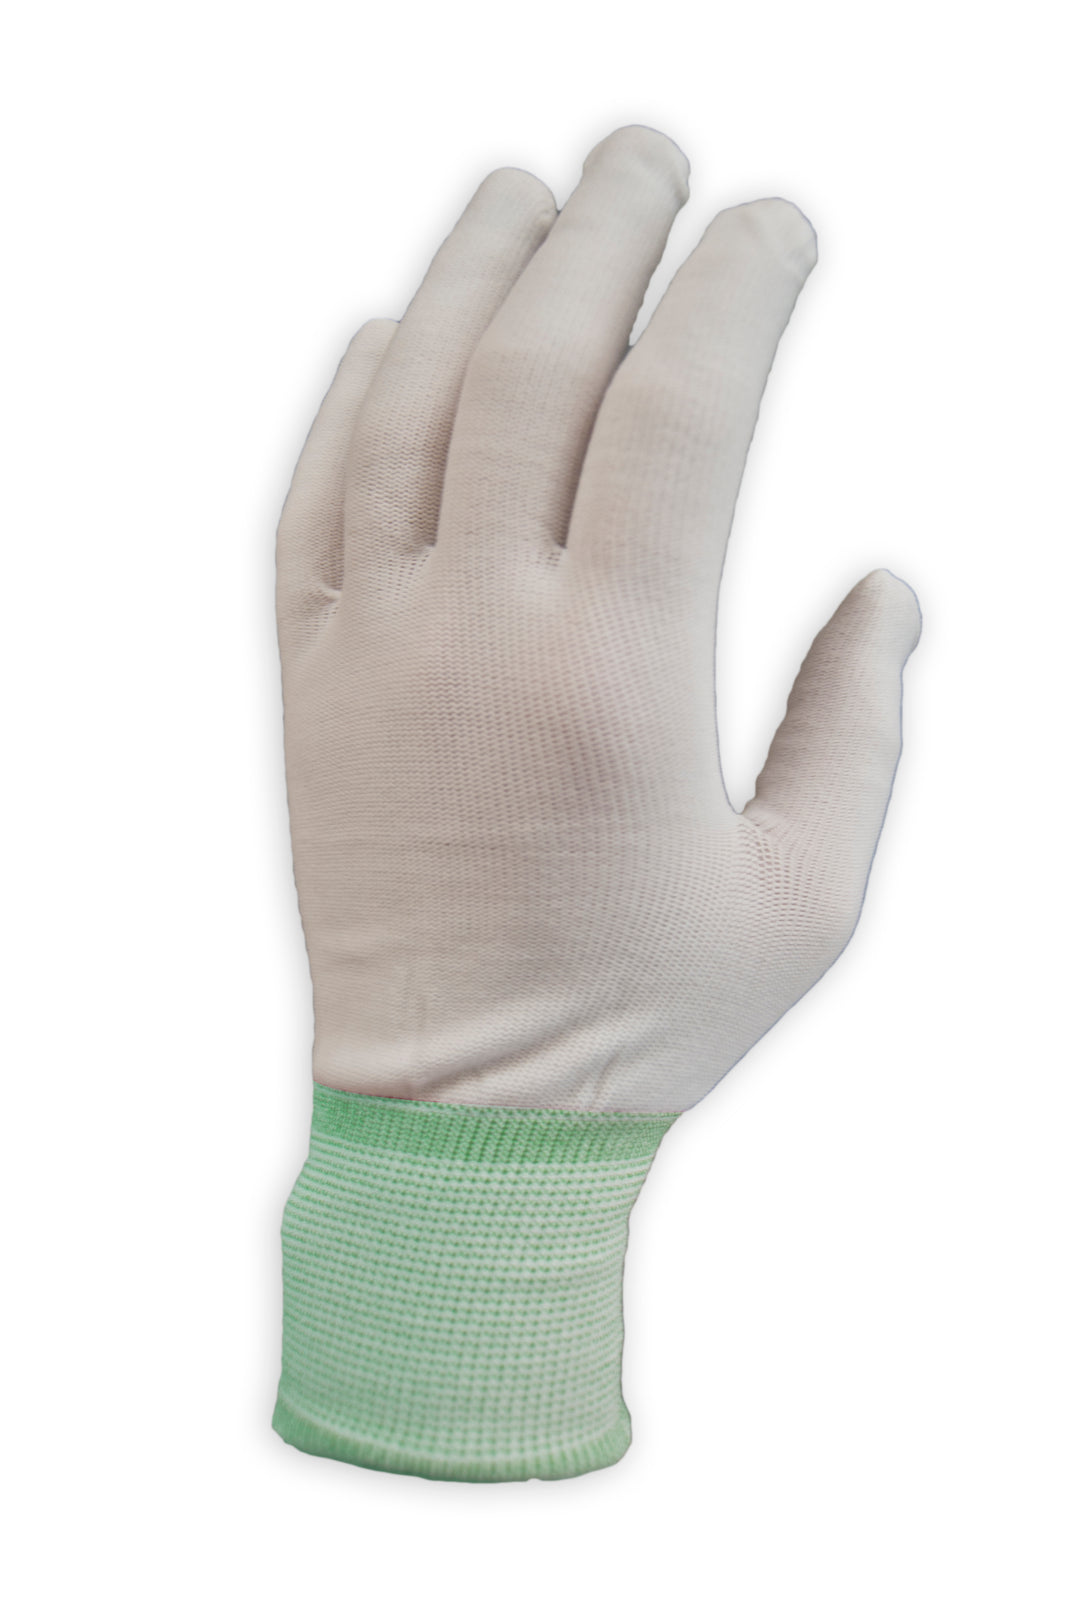 Purus GLFF Pure Touch Full Finger Glove Liners Small - XL